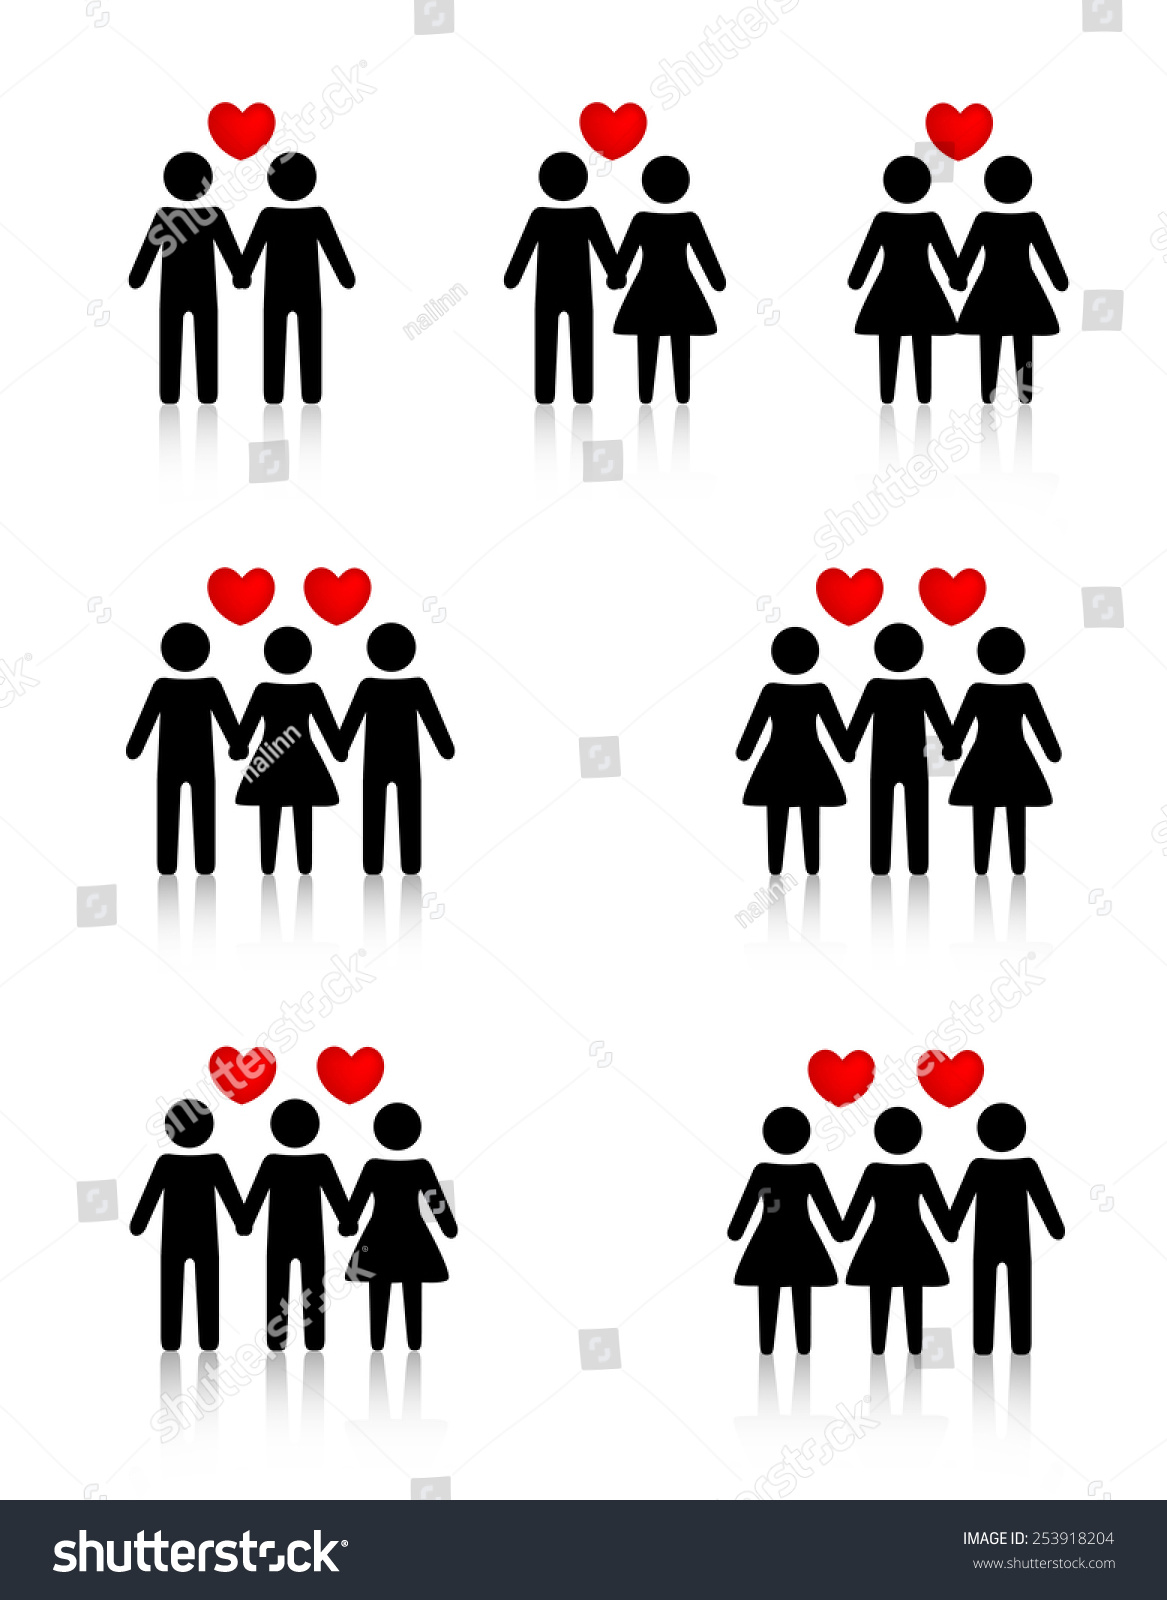 human sexuality clipart - photo #43